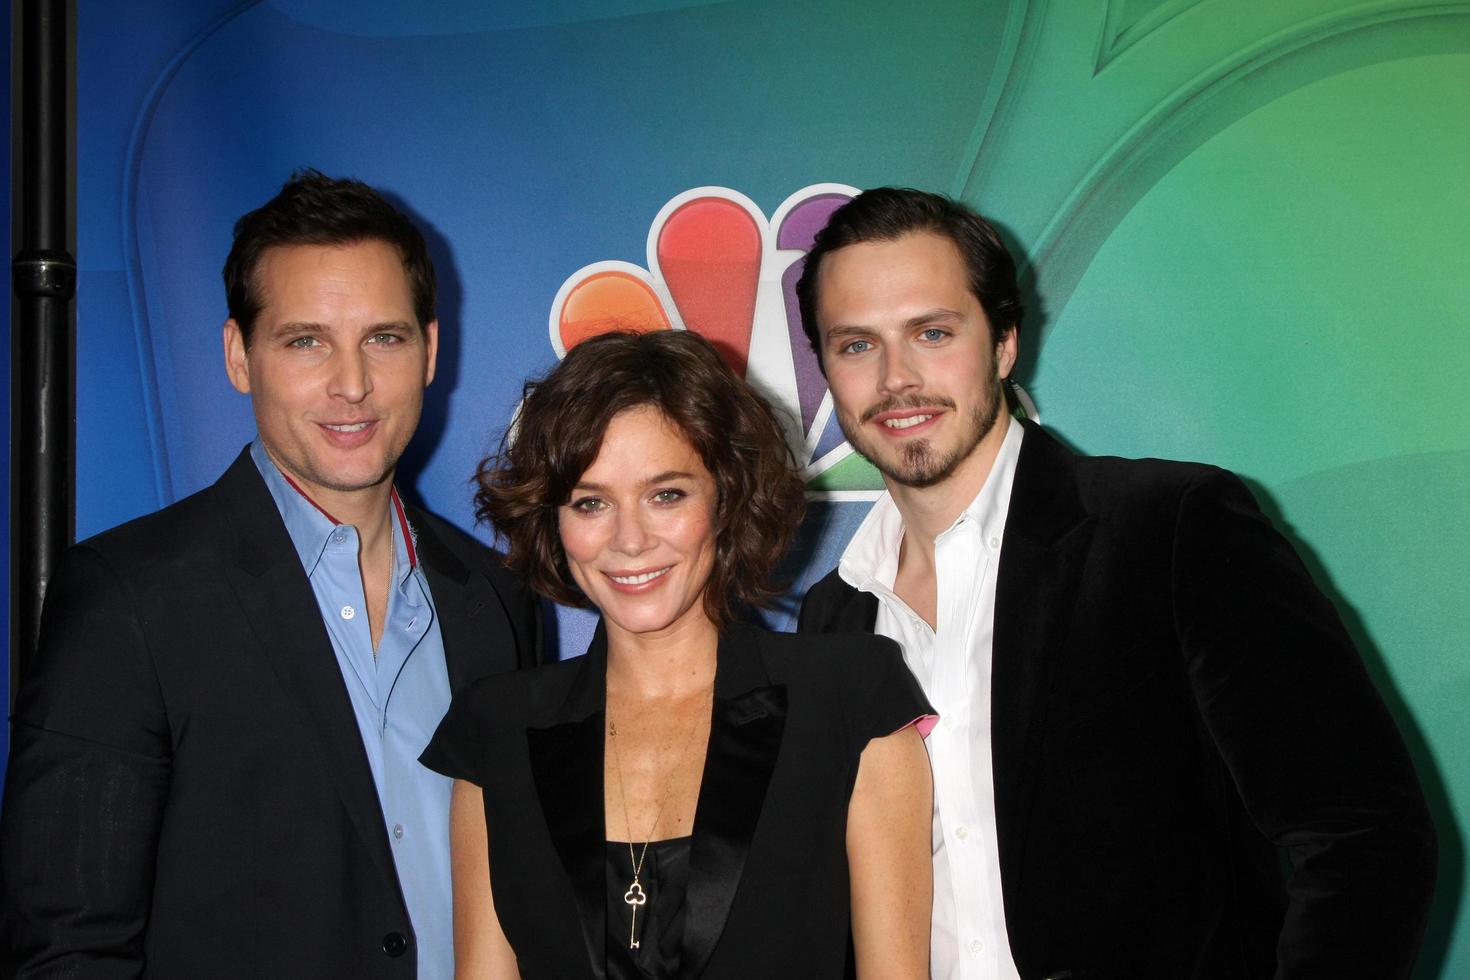 LOS ANGELES, DEC 16 - Jack Robinson, Anna Friel, Peter Facinelli at the NBCUniversal TCA Press Tour at the Huntington Langham Hotel on December 16, 2015 in Pasadena, CA photo